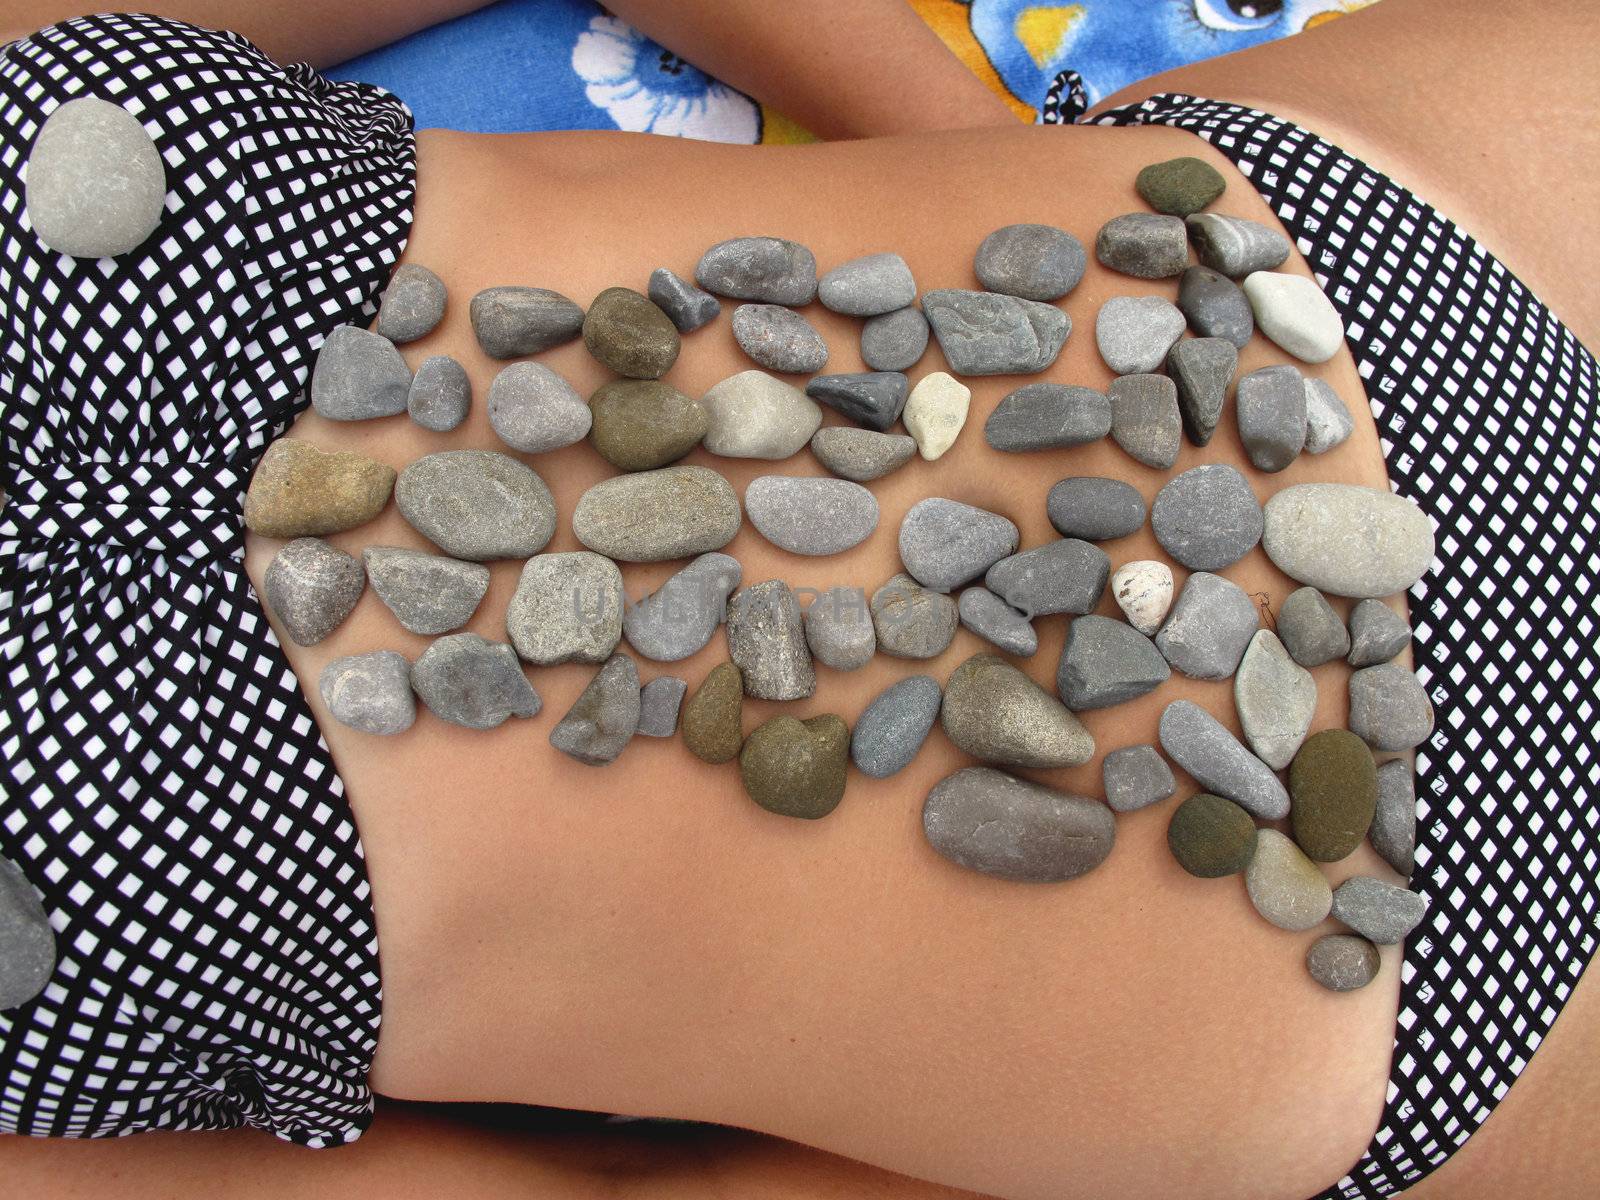 Small stones on a female stomach, taken on the beach resot                             